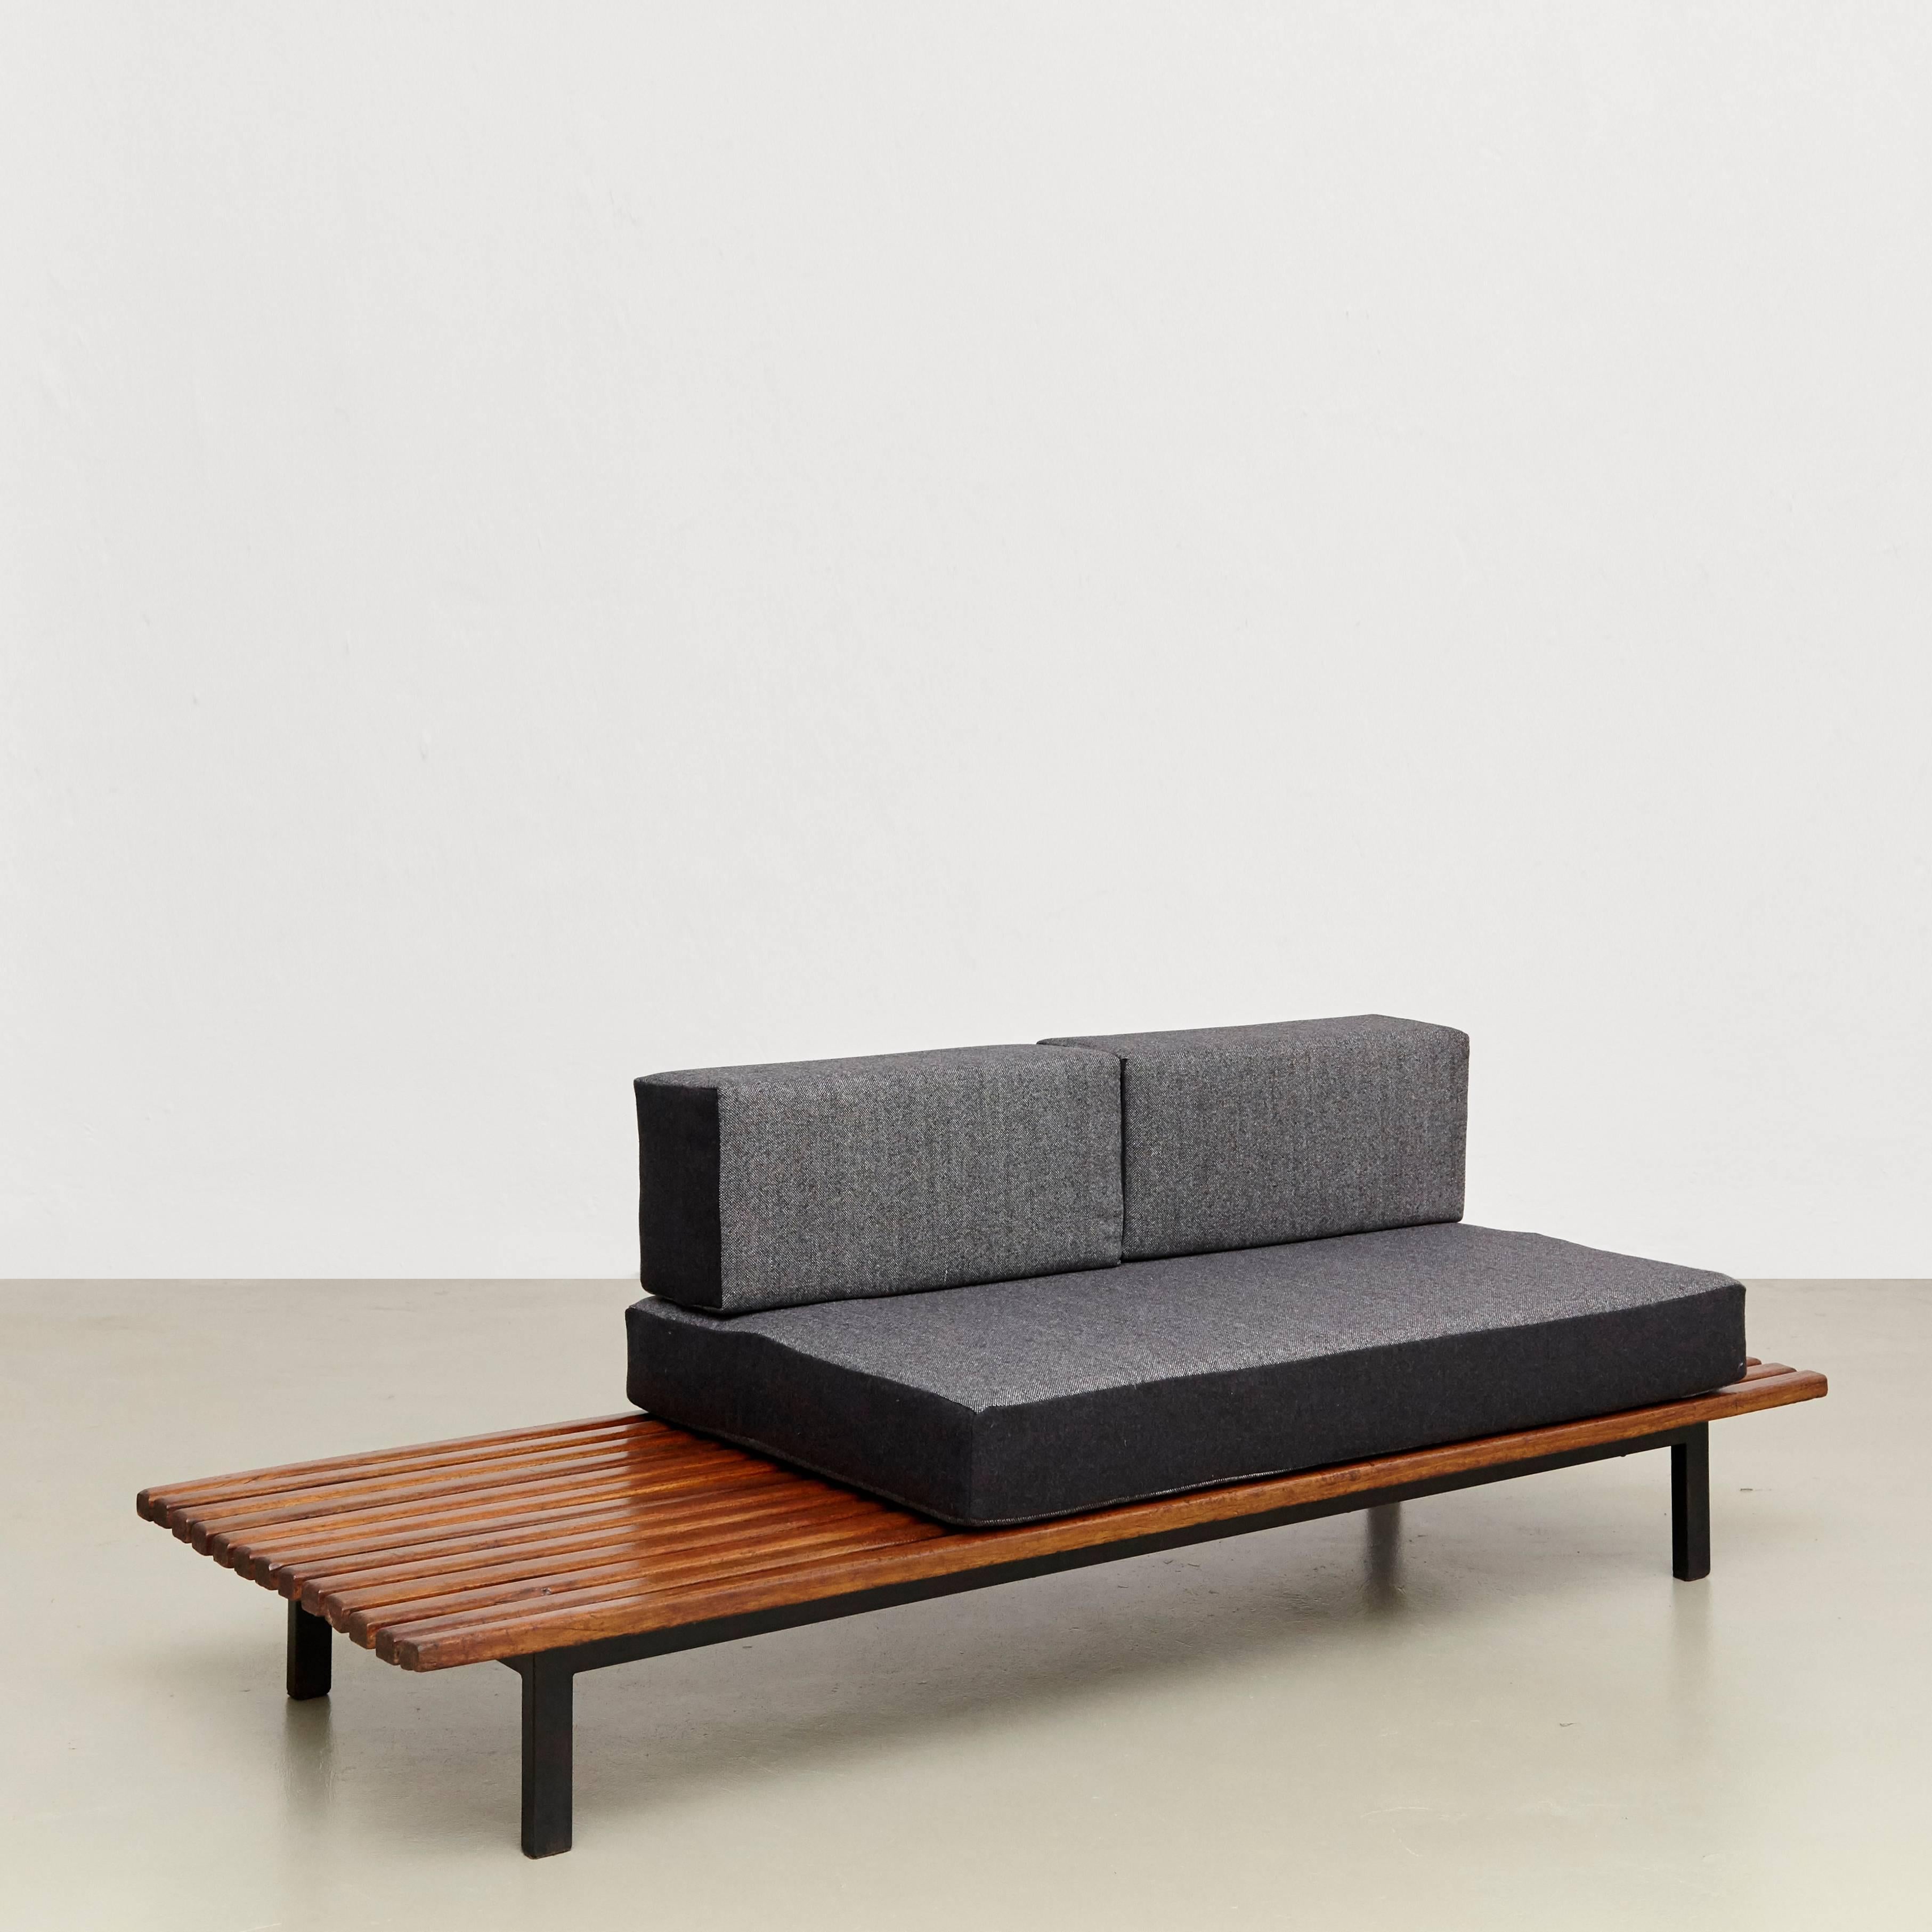 Bench designed by Charlotte Perriand, circa 1950.
Manufactured by Steph Simon (France) circa 1950.
Wood, lacquered metal frame and legs.

The cushions has been produced now according to the original measurements with high quality wool